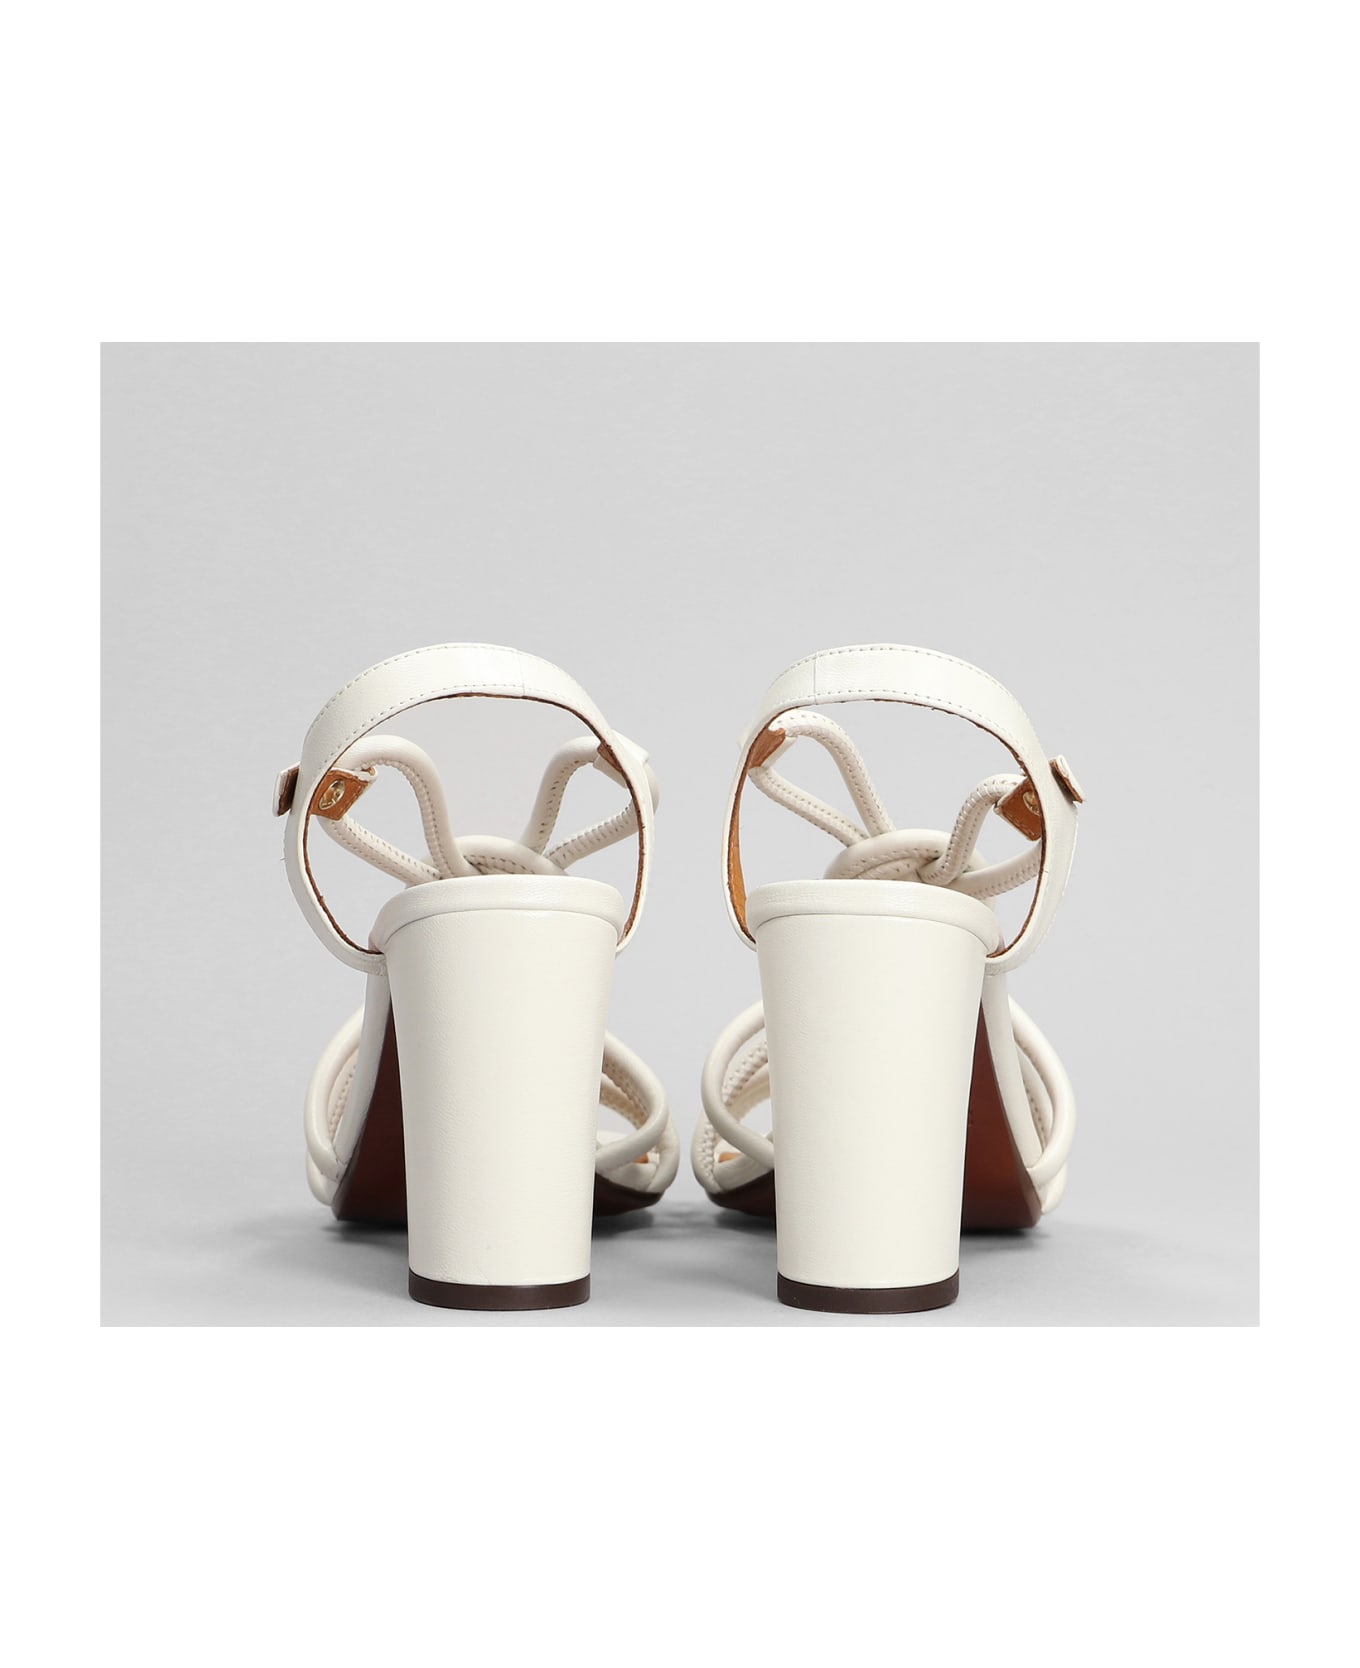 Chie Mihara Bane Sandals In White Leather - white サンダル